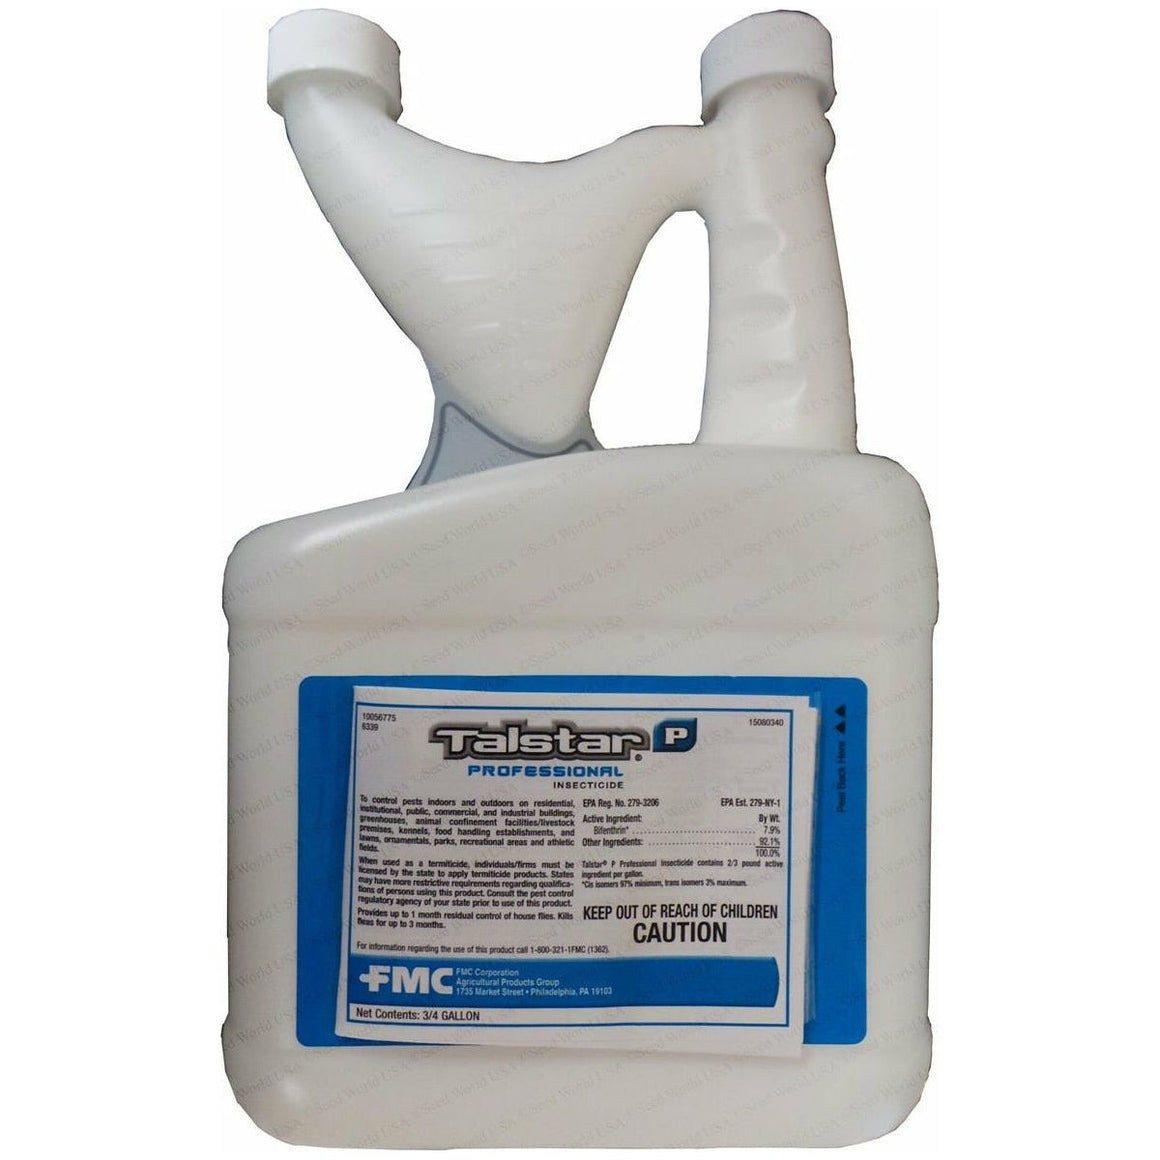 Talstar P Profesional Insecticide - 1 Case (4 x Gal.) - Seed World